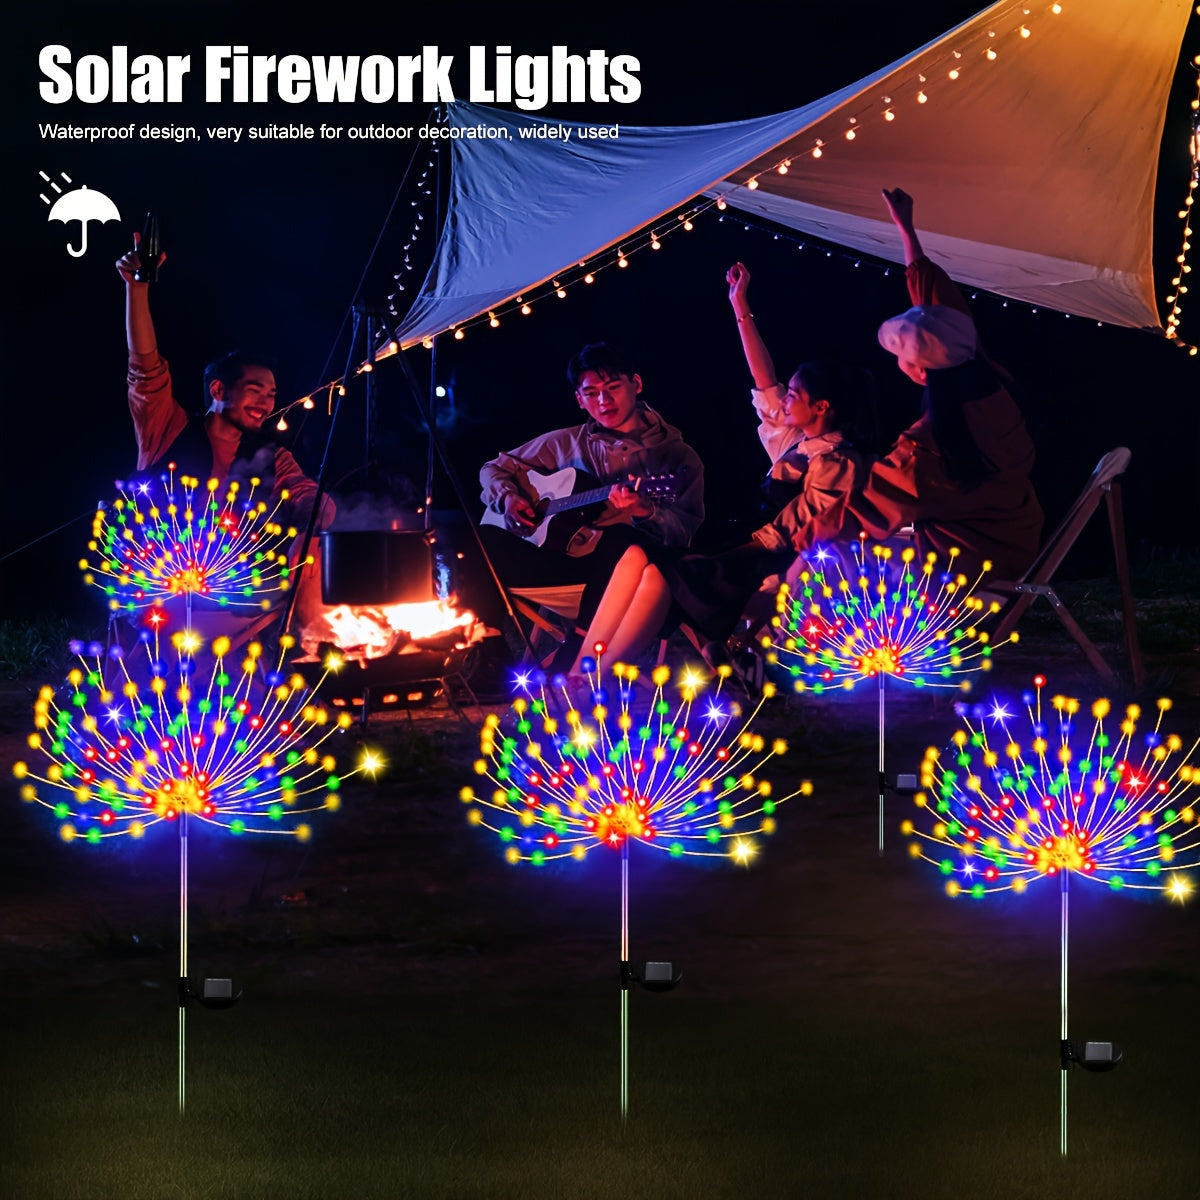 Product Title: 1 Pack Solar Firework Light Outdoor - IP65 Waterproof Decorative Fairy Lights with 8 Lighting Modes - Halloween Decorations Lights for Yard, Garden, Patio - Stake Included - Outdoor Lighting Decoration